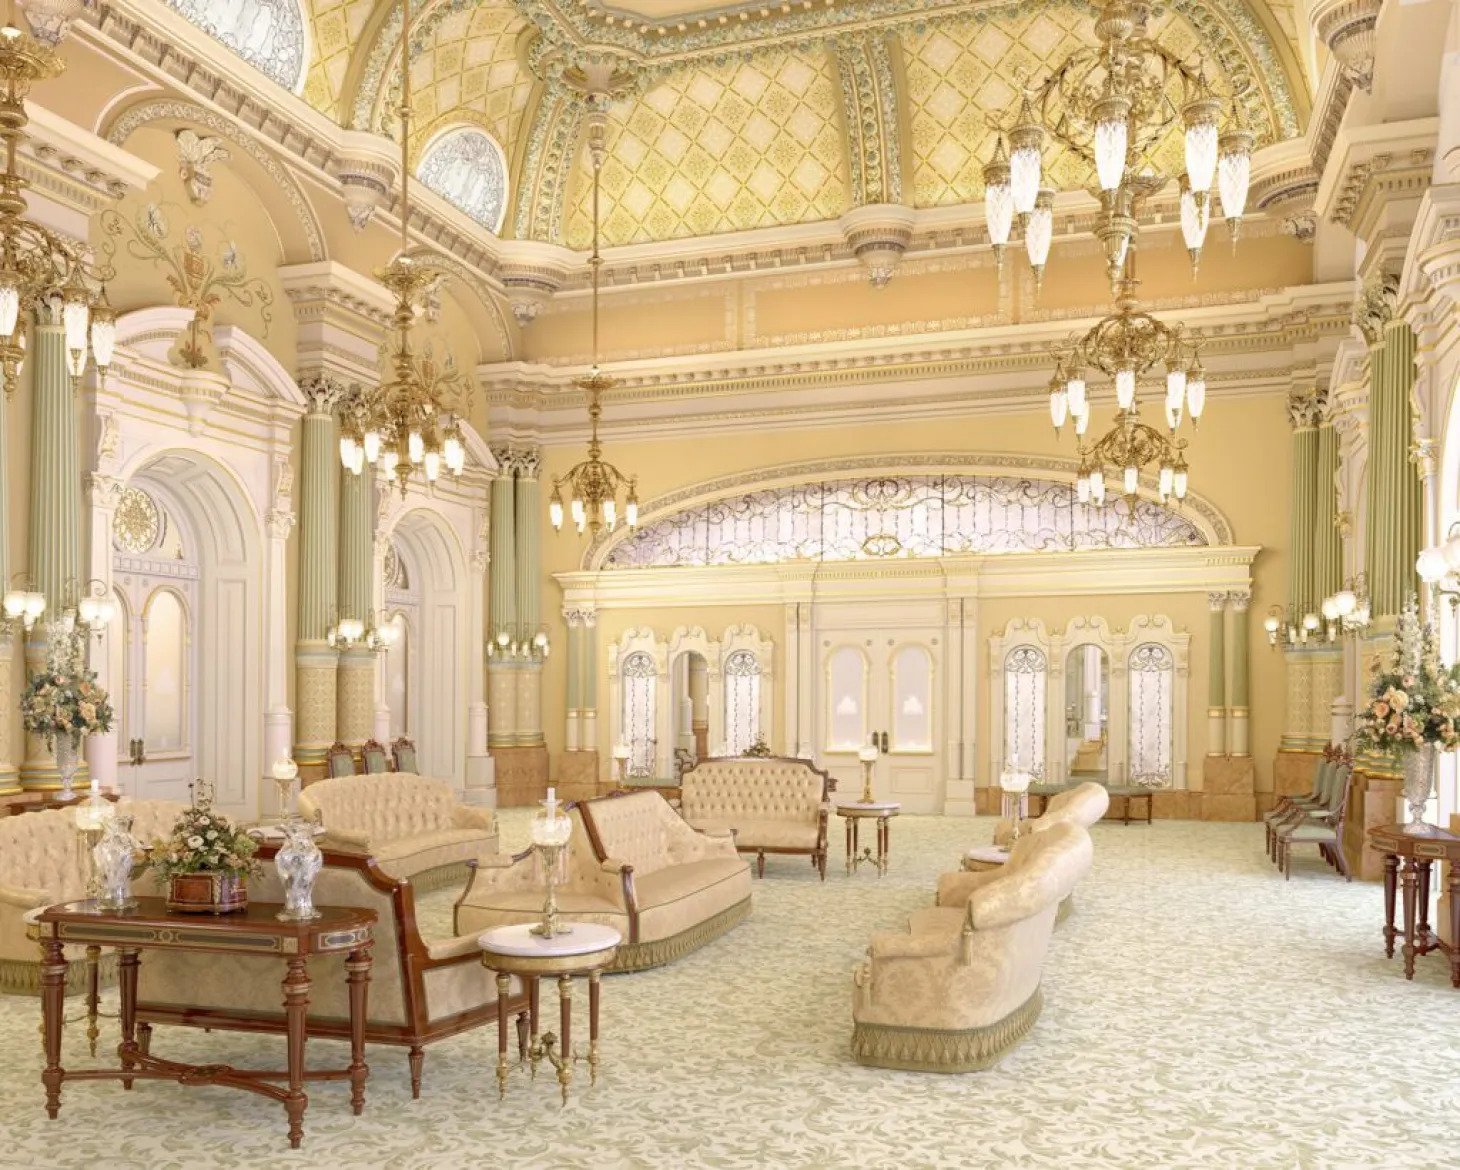 A large white room with several chandeliers hanging from the ceiling, with white couches all around the white carpet.